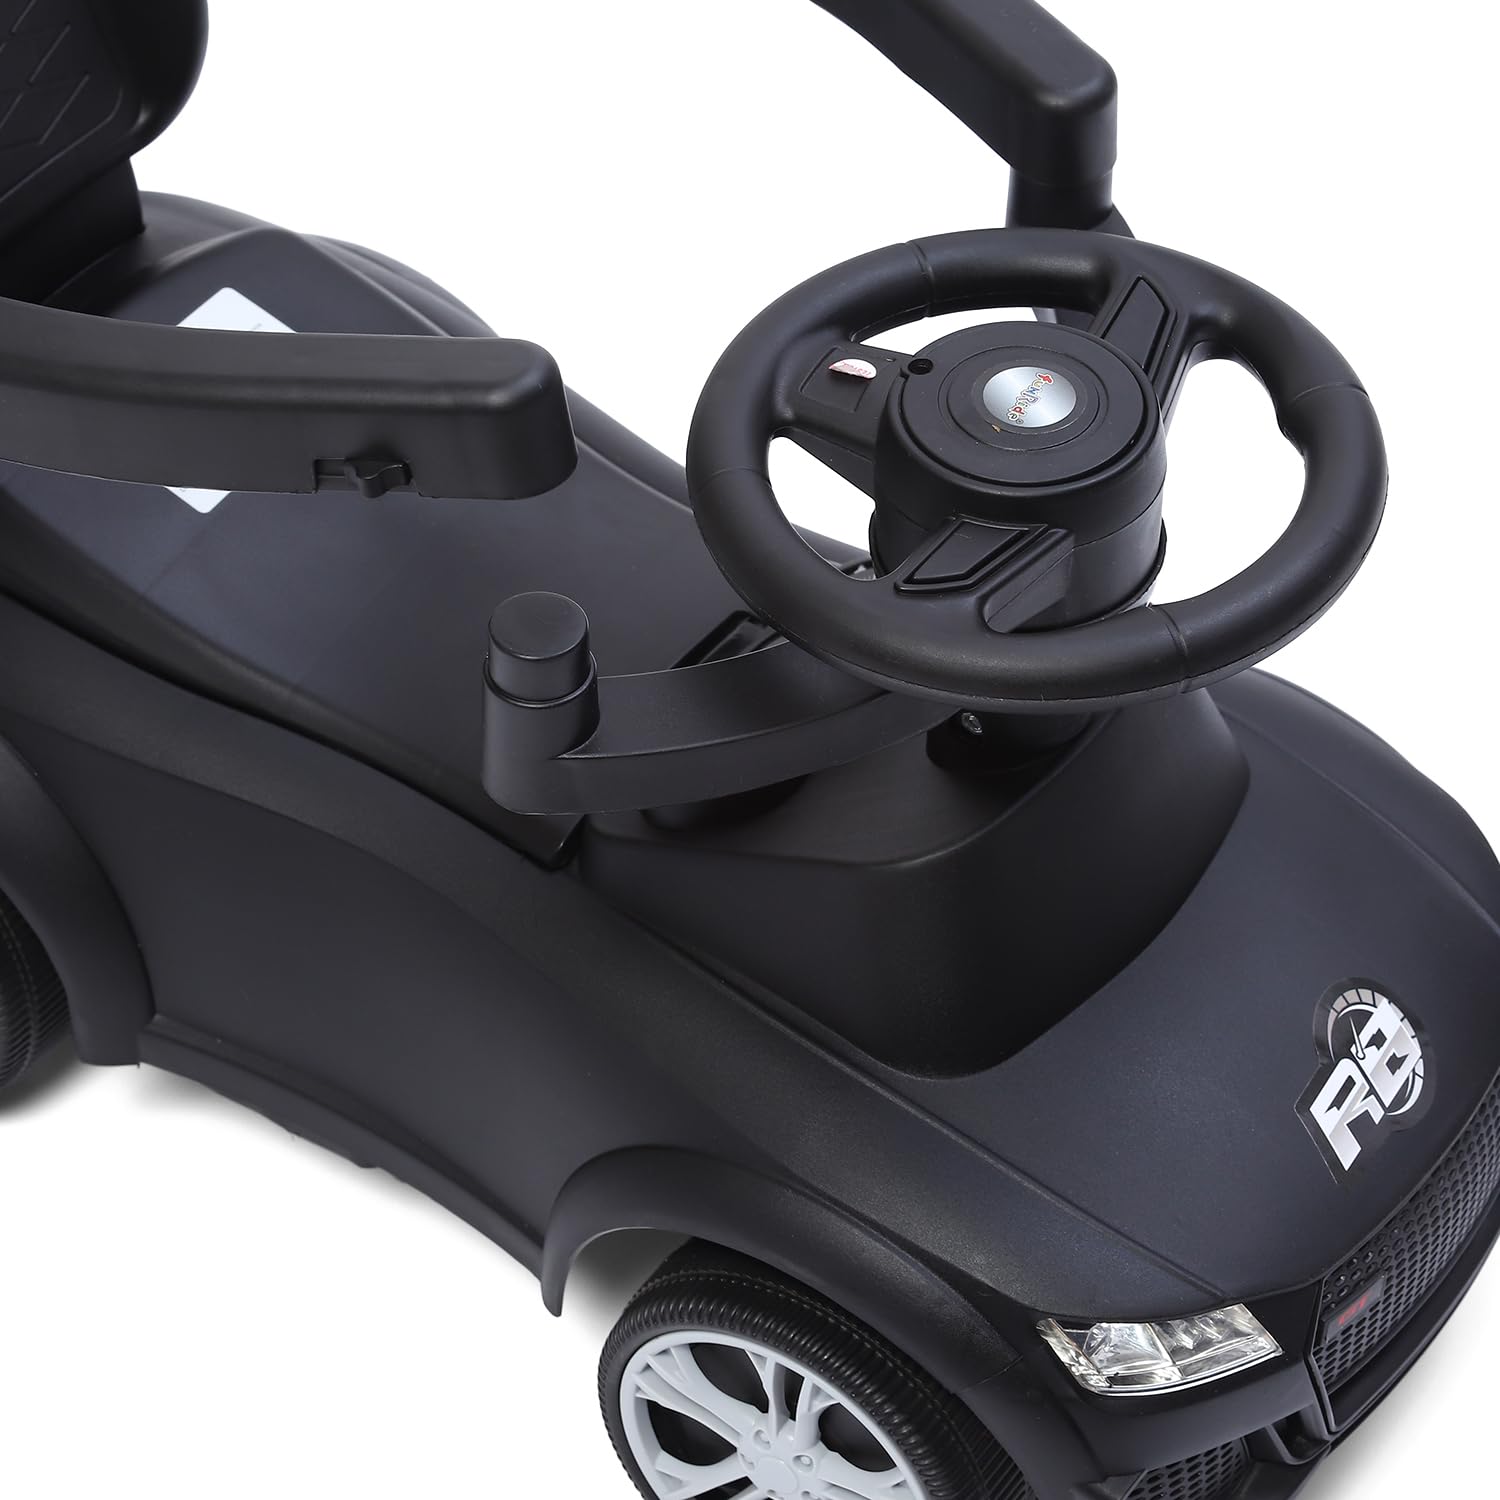 Car Ride On - R8 3-in-1 for Kids with Parent Handle, Music, Light, Backrest & Storage - 1 to 3 Years, Kids Indoor/Outdoor Toy Car for Boys and Girls